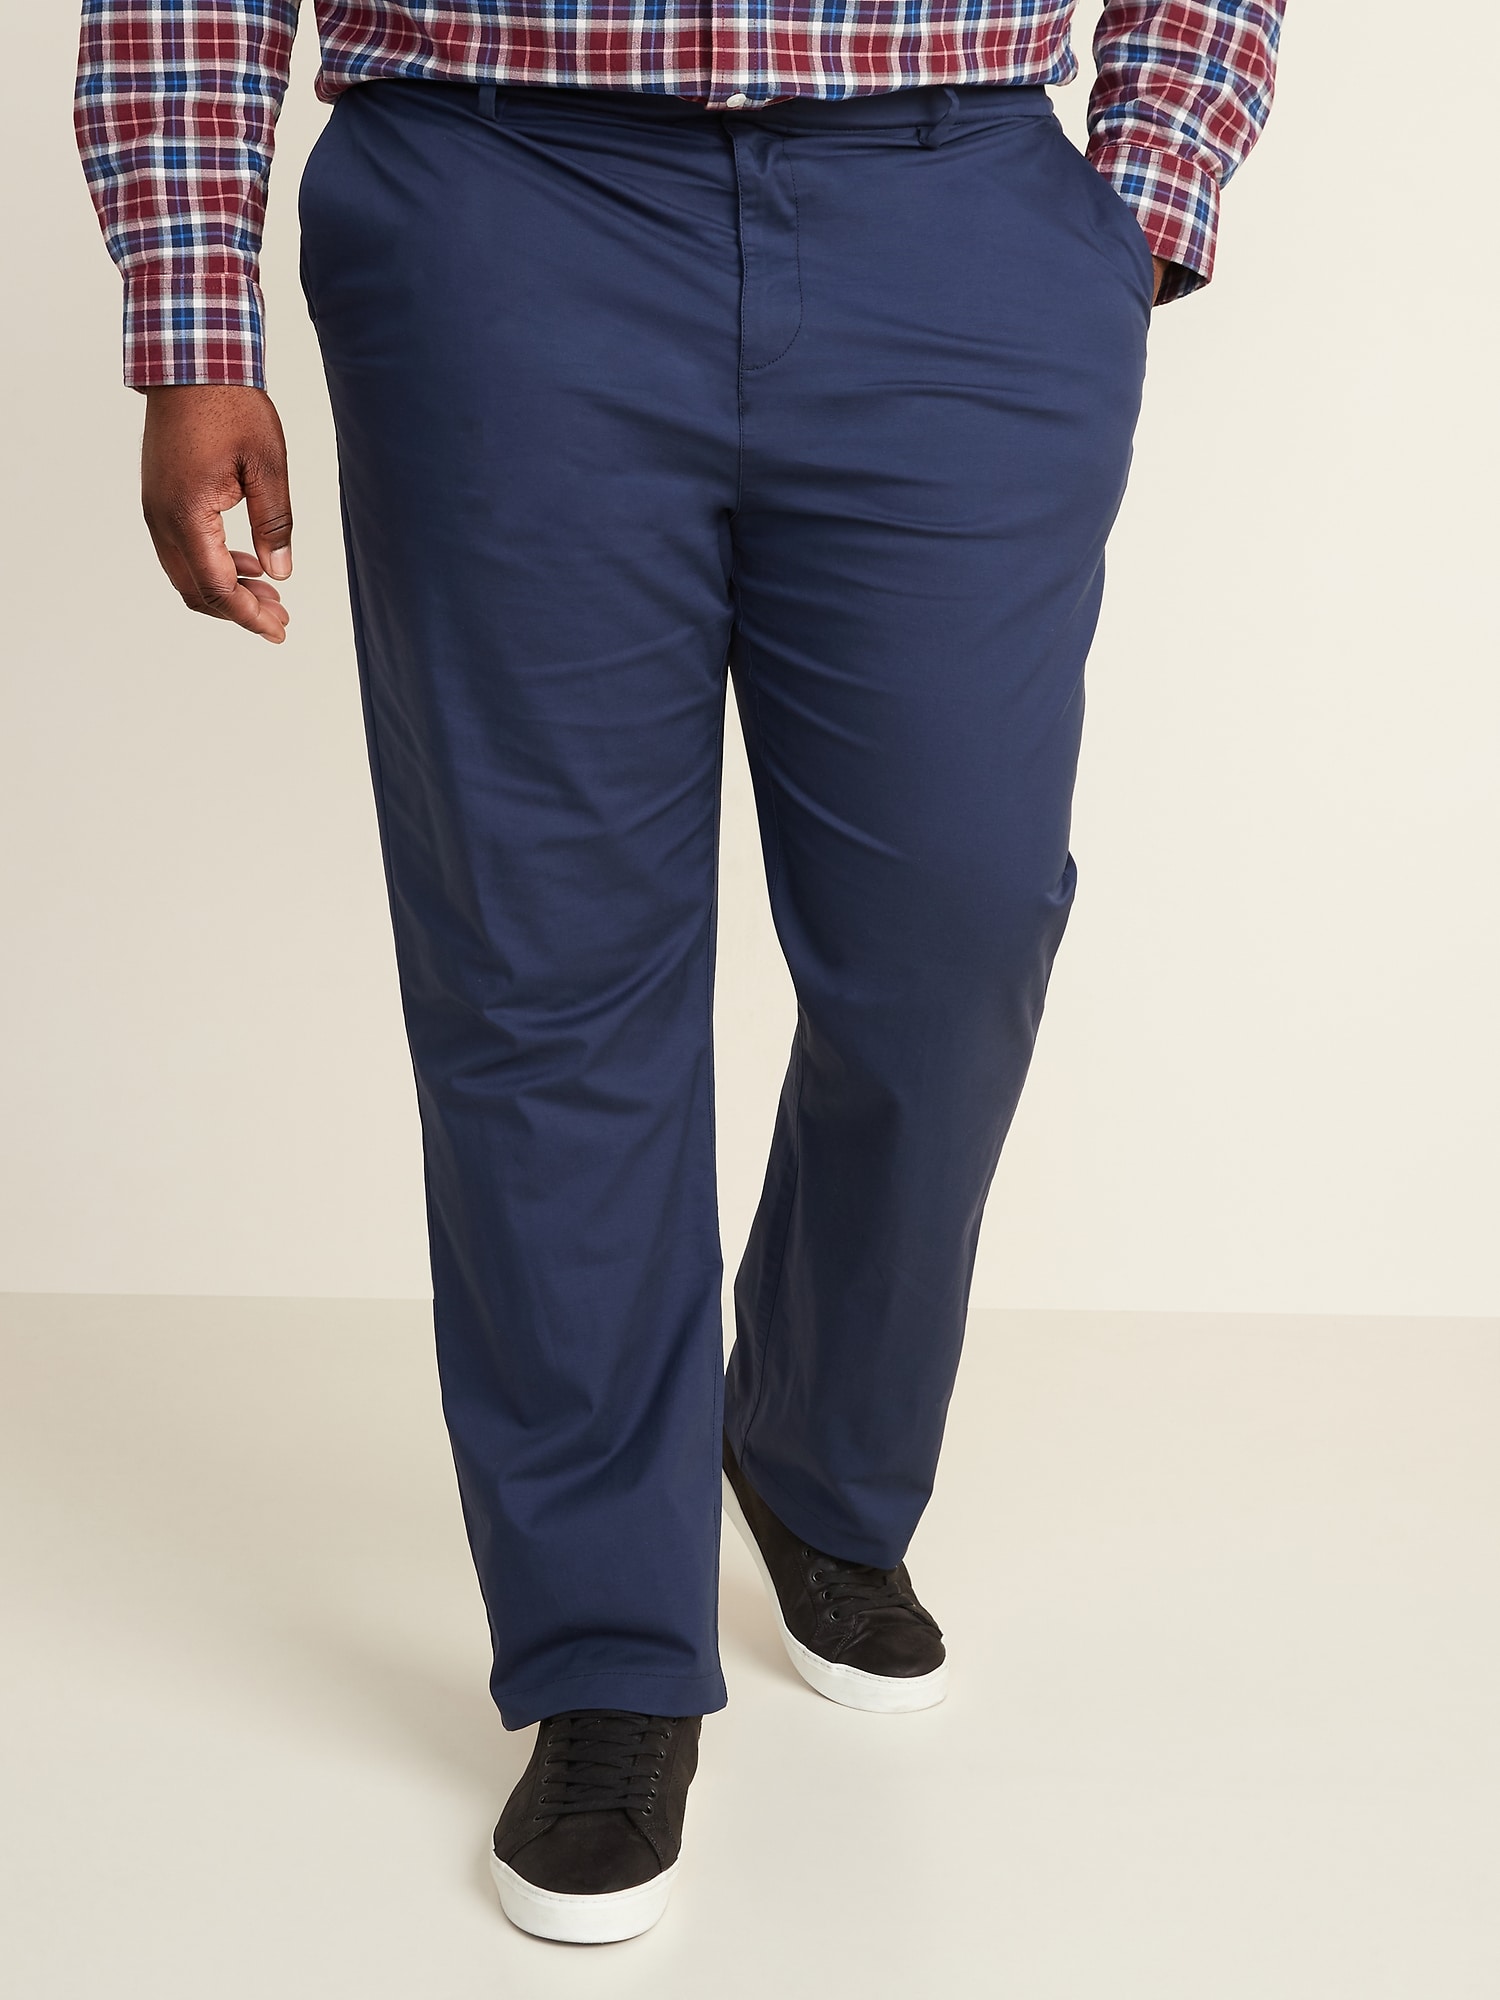 Straight Built-In Flex Ultimate Tech Chino Pants for Men | Old Navy